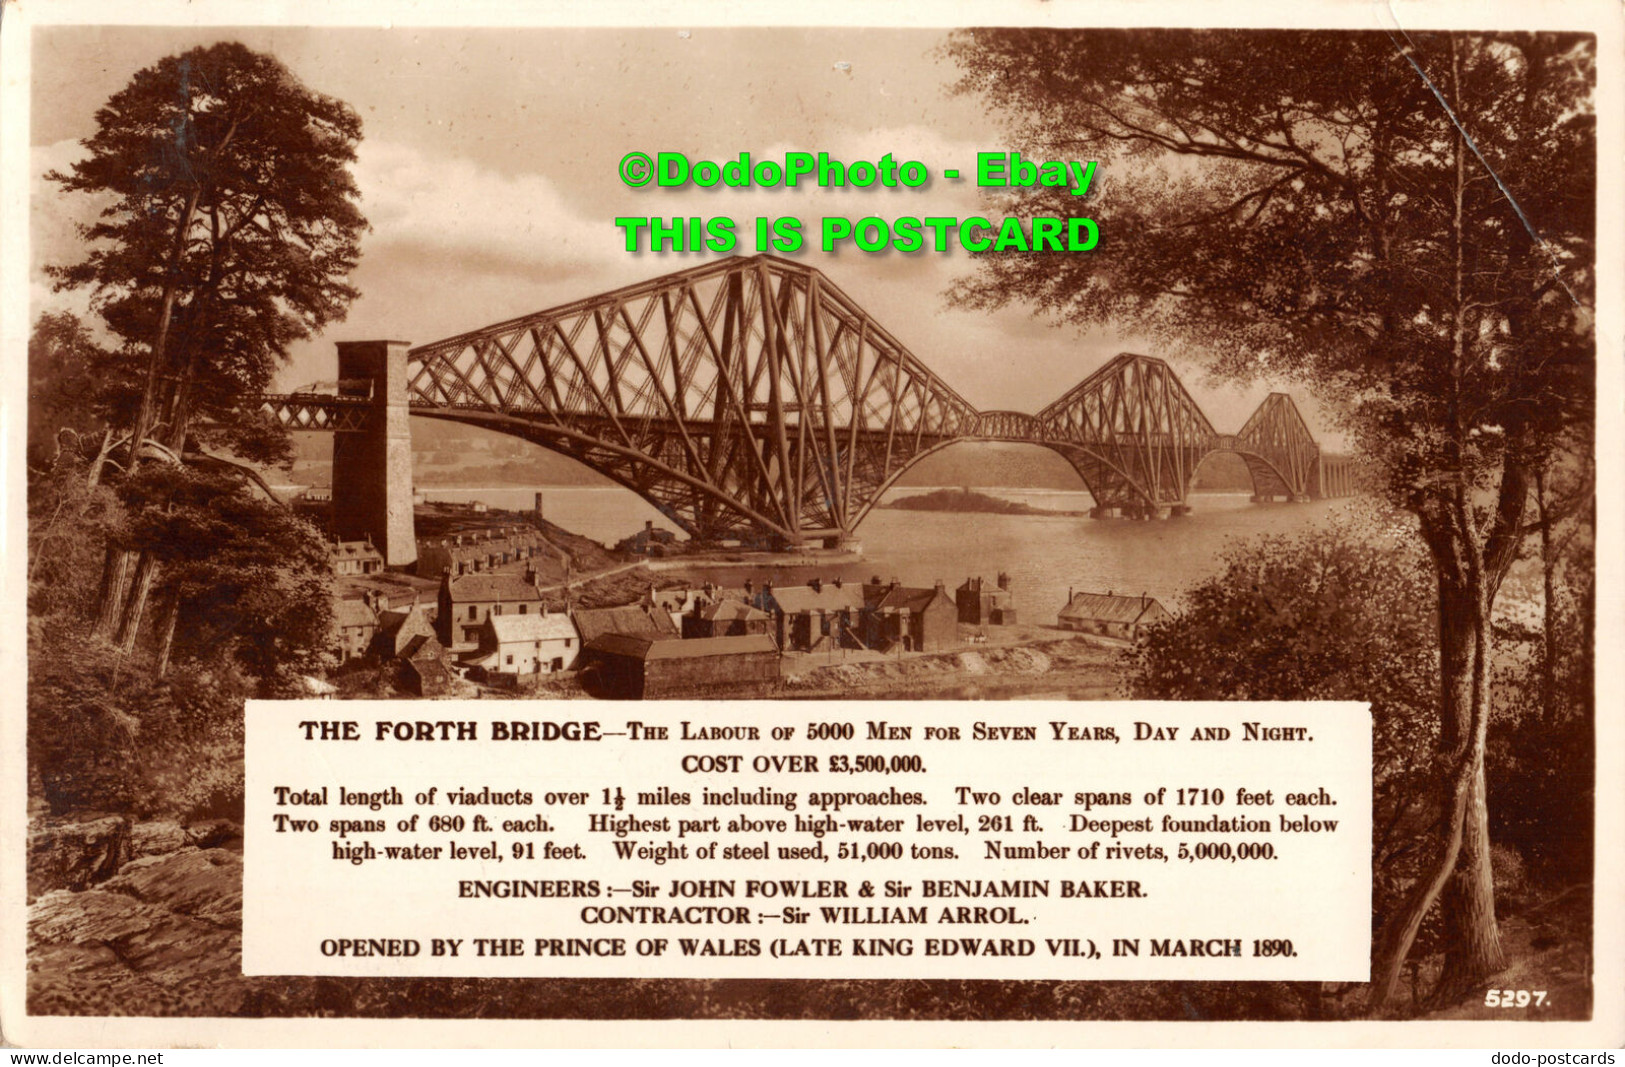 R452986 The Forth Bridge. 5297. The Best Of All Series. J. B. White. RP - World